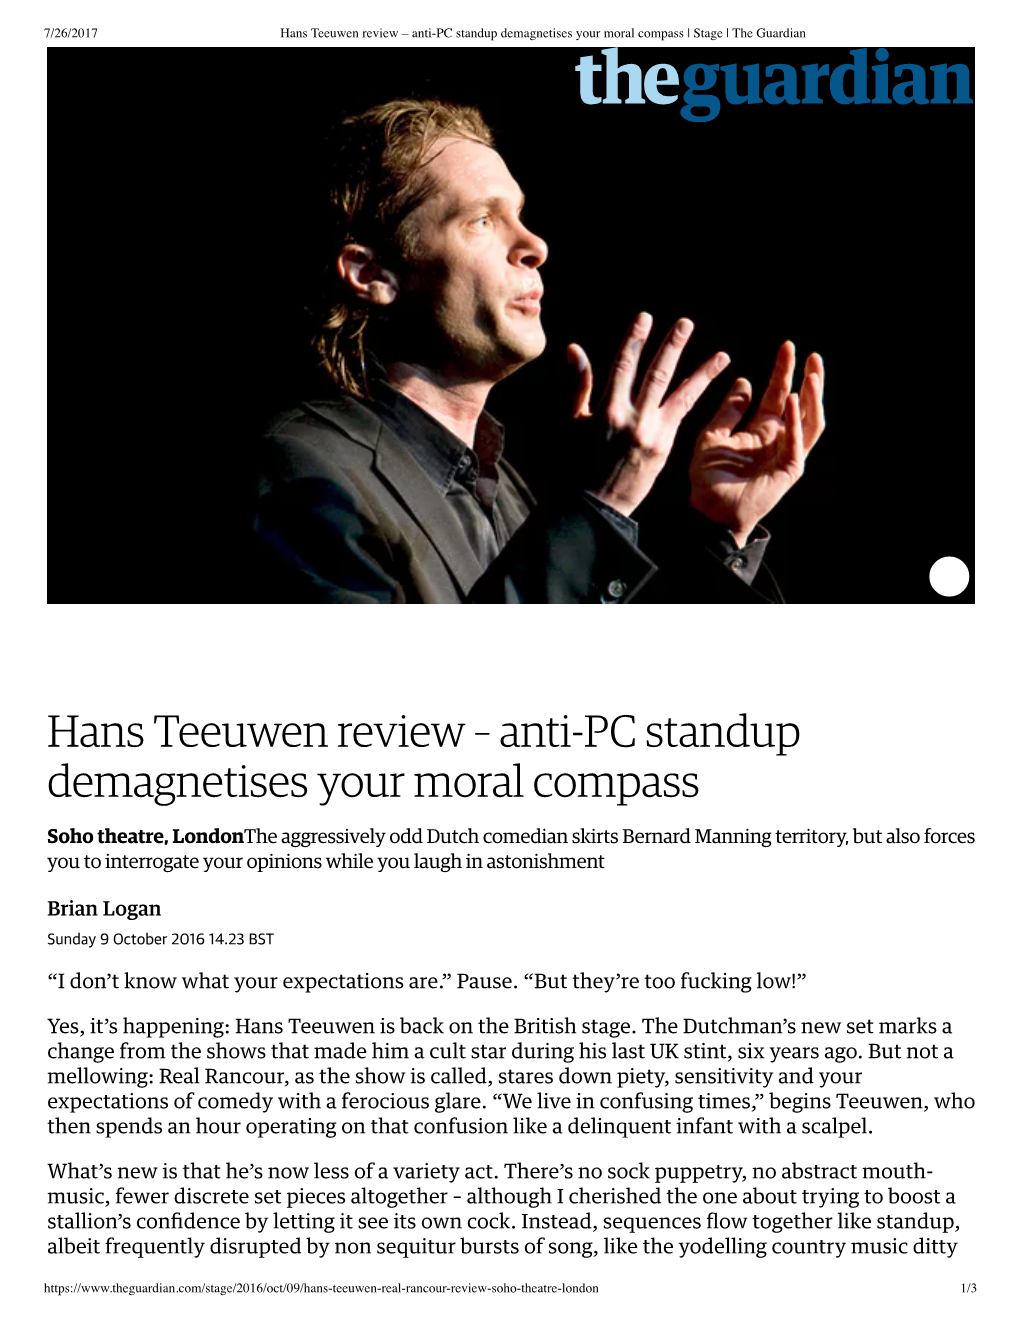 Hans Teeuwen Review – Anti-PC Standup Demagnetises Your Moral Compass | Stage | the Guardian